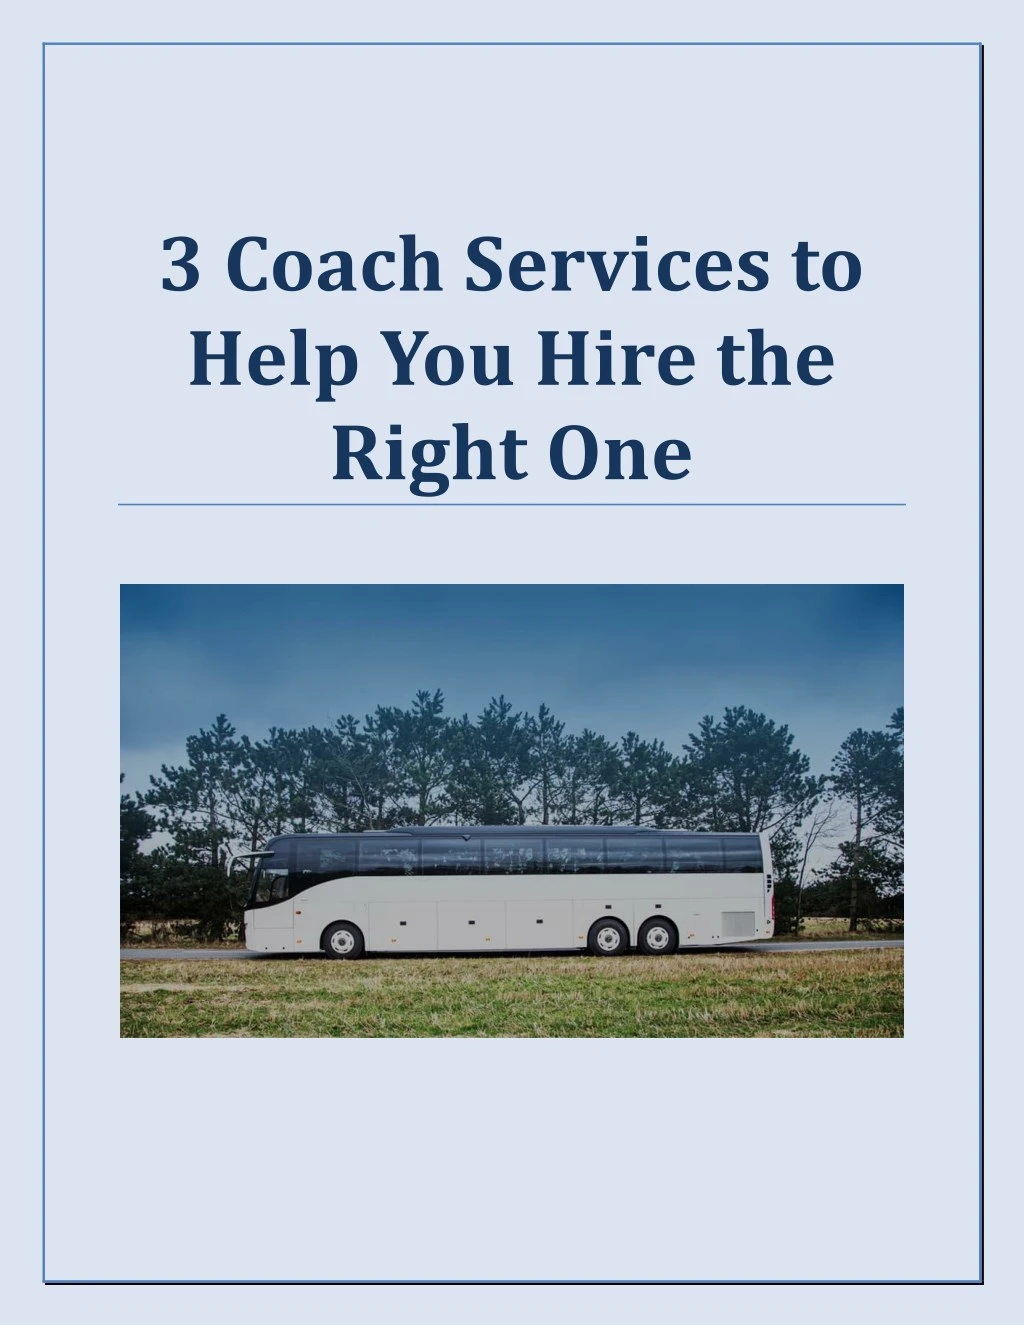 3 coach services to help you hire the right one